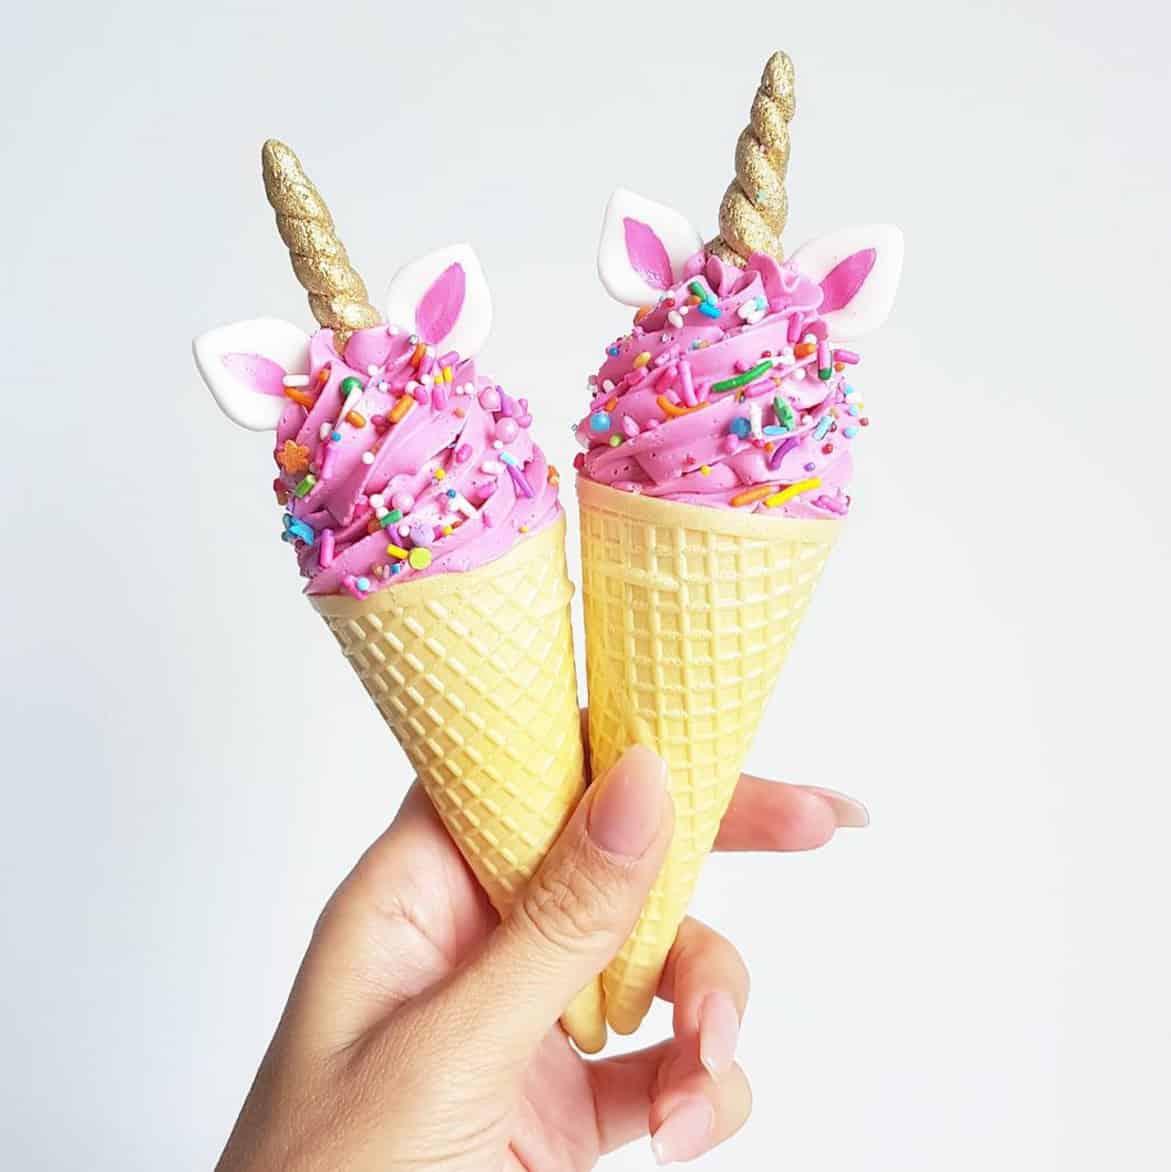 10 MAGICAL UNICORN FOODS KIDS WILL GO CRAZY OVER